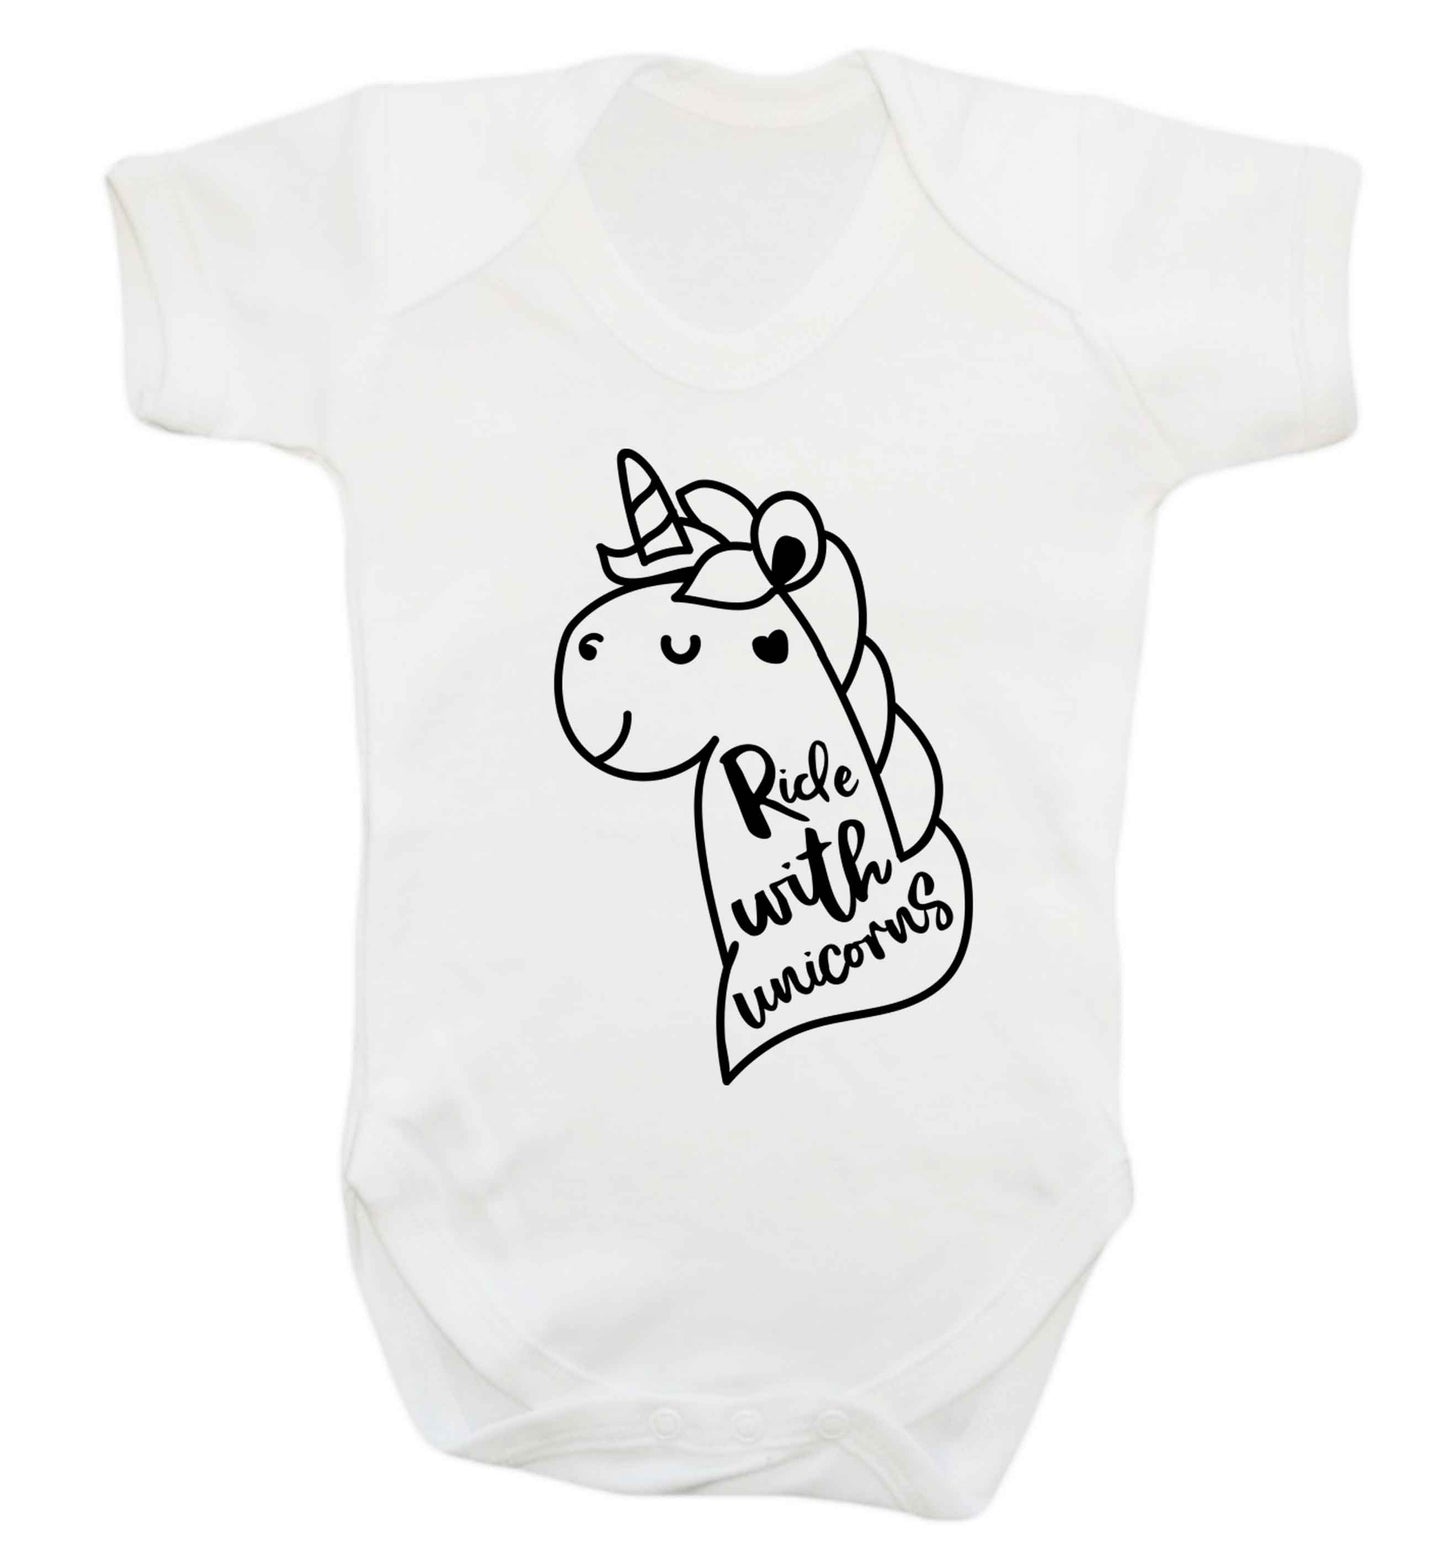 Ride with unicorns Baby Vest white 18-24 months